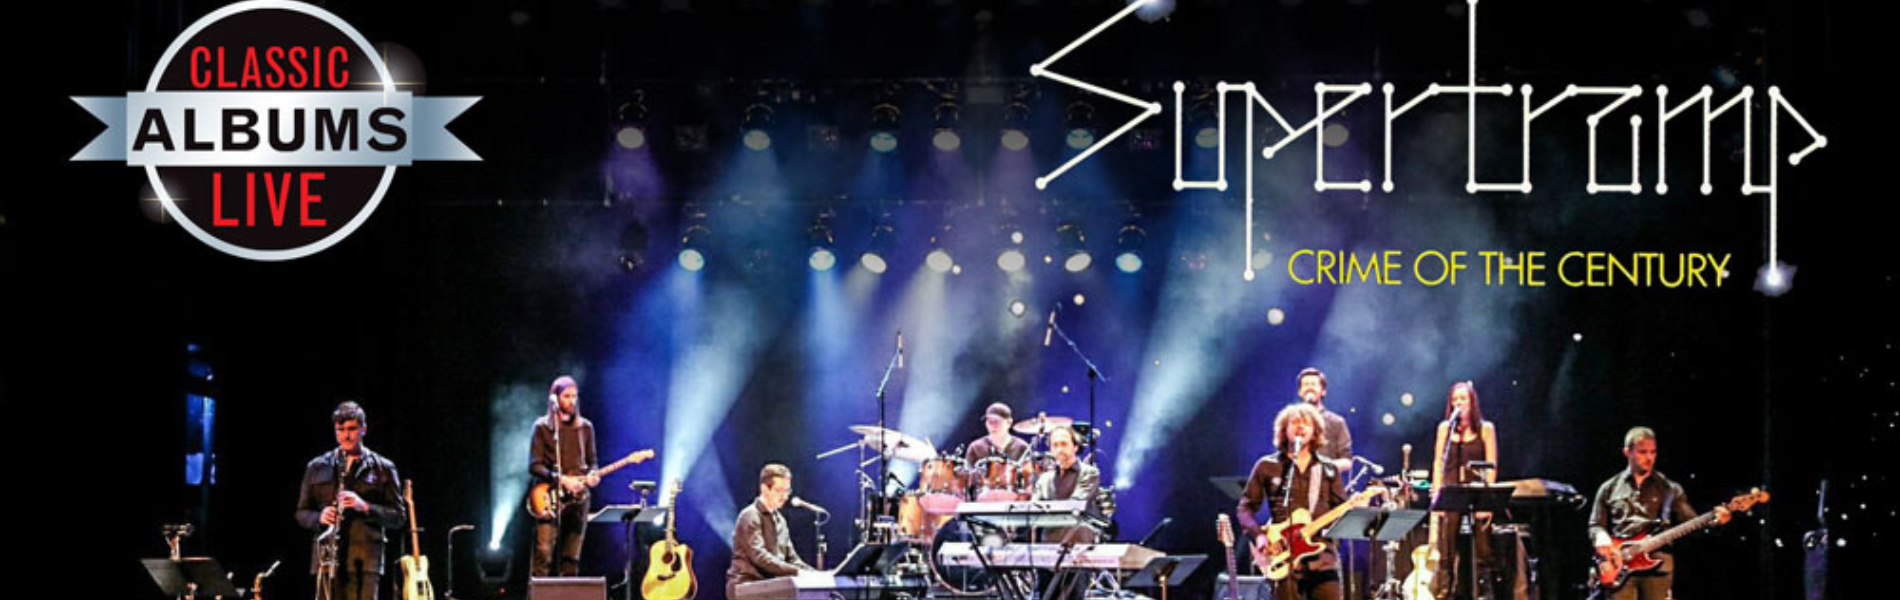 Classic Albums Live band performing on stage with their logo and Supertramp overlaid on the image